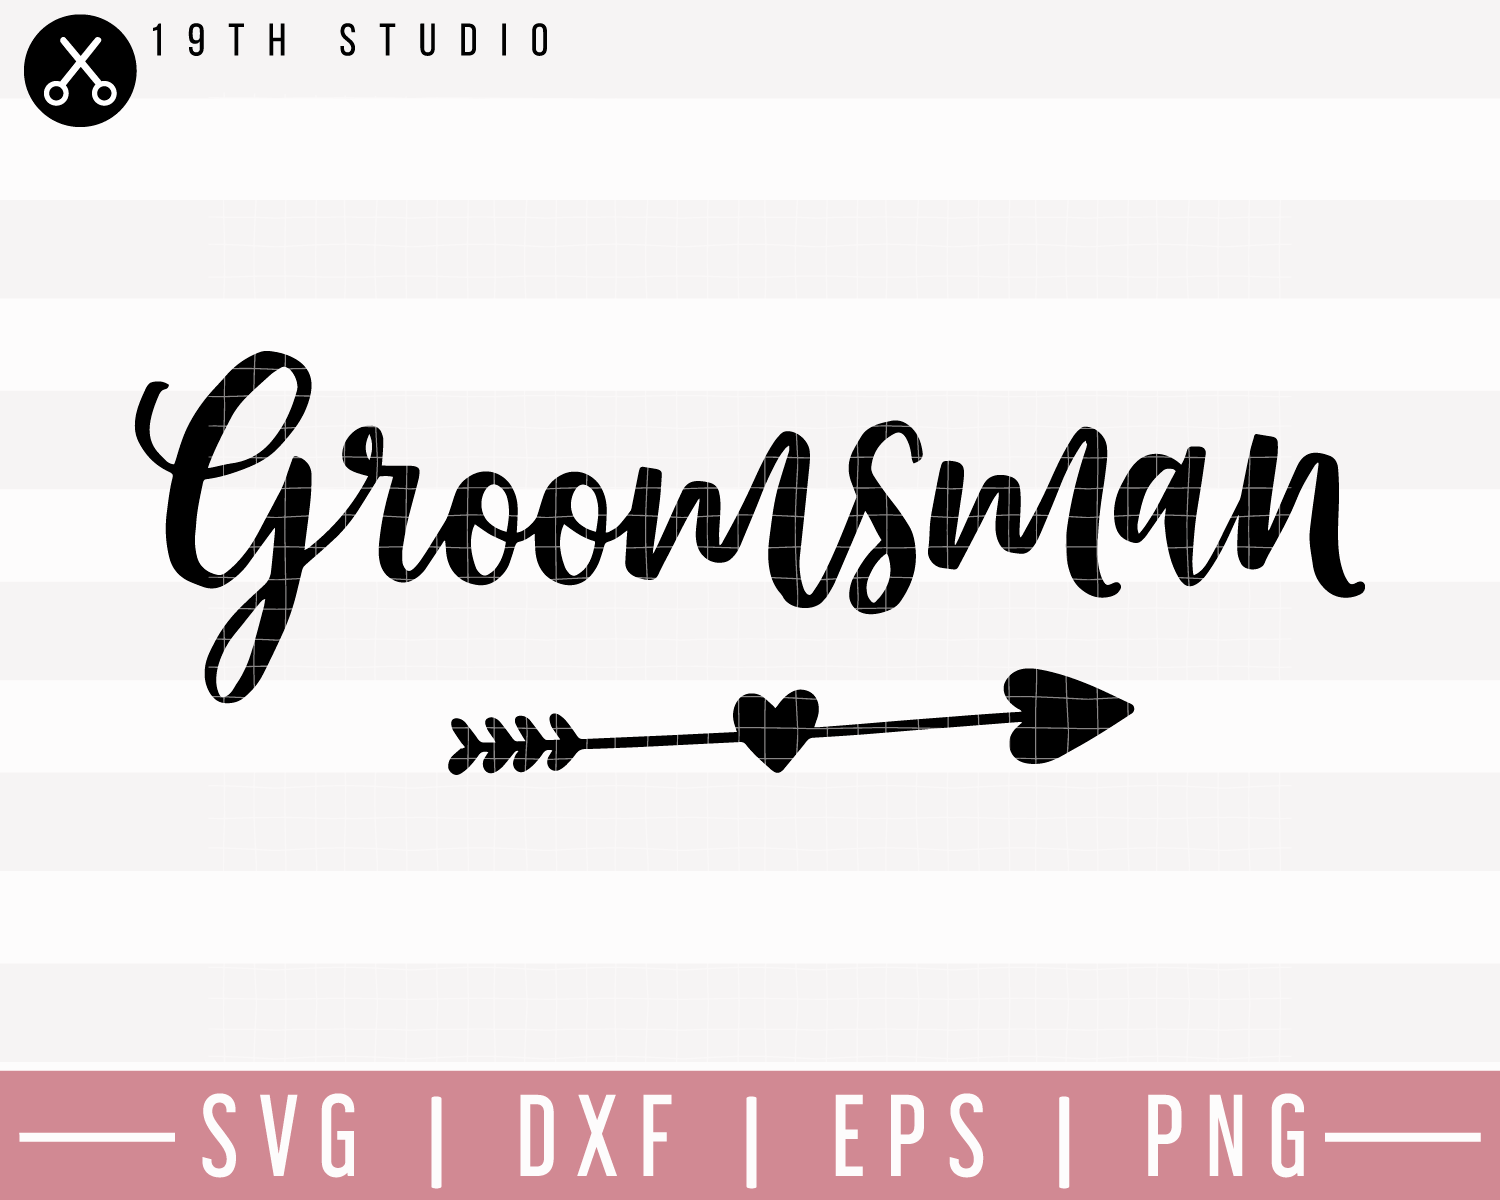 Groomsman SVG | M27F8 Craft House SVG - SVG files for Cricut and Silhouette